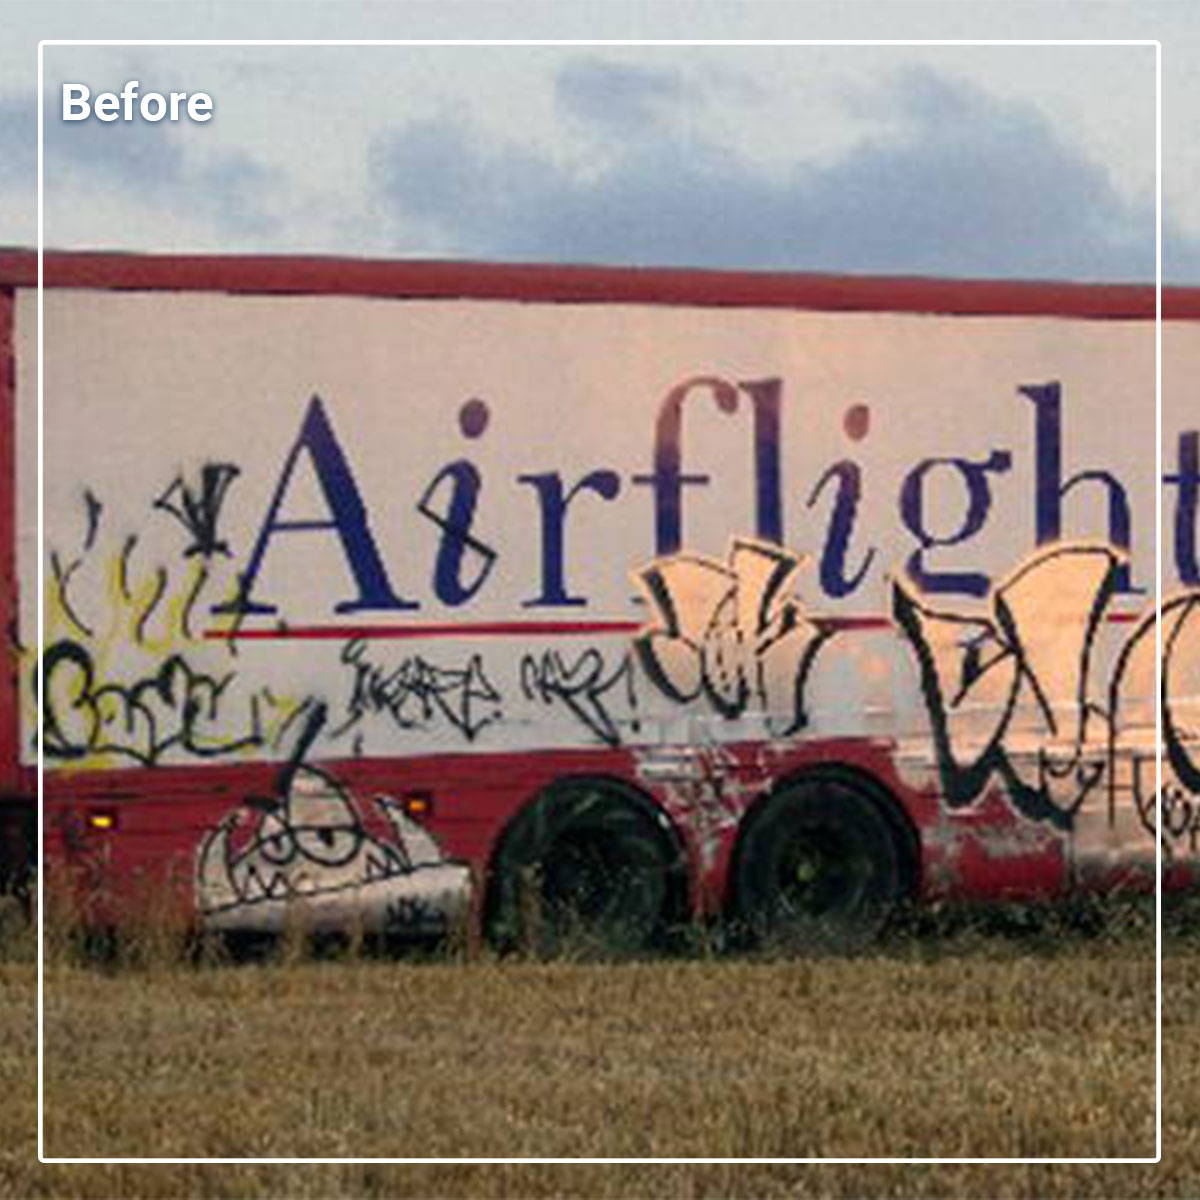 removing graffiti from trailer